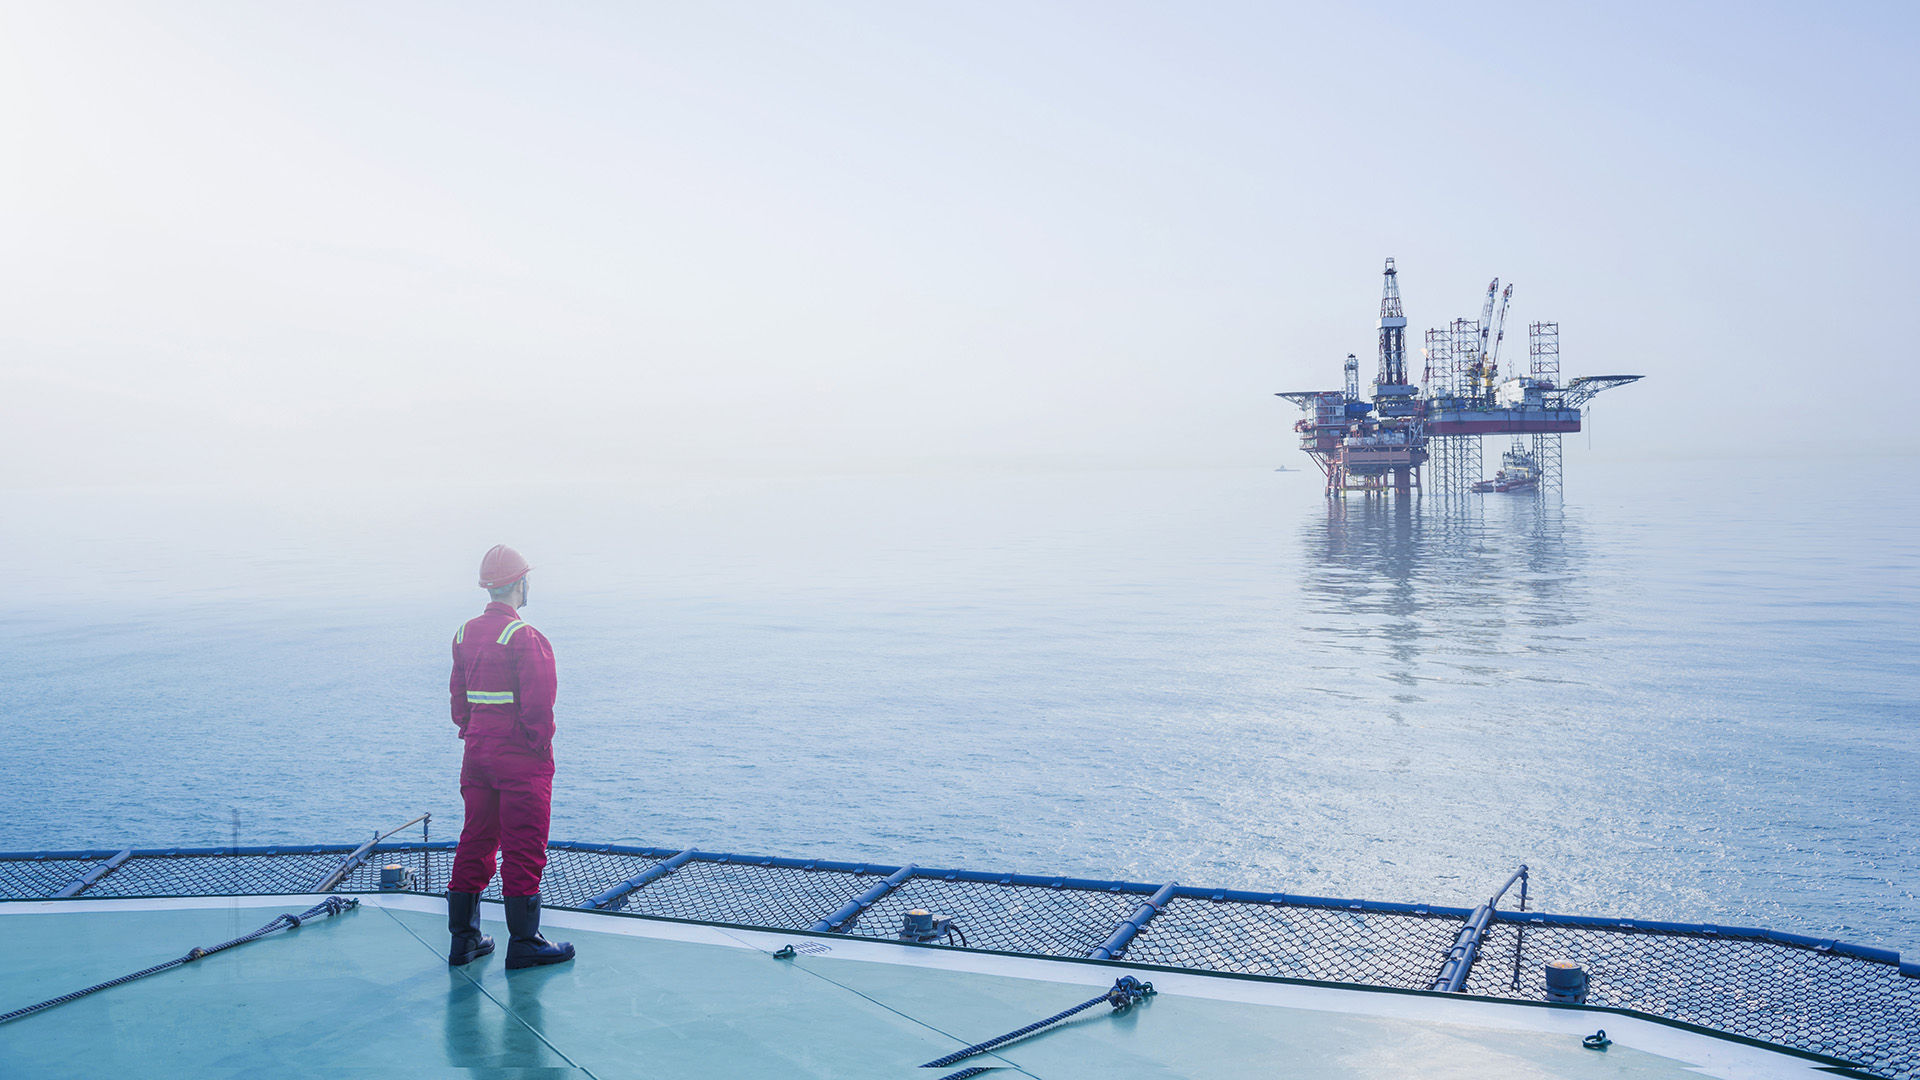 A person in a hard hat and work clothes stands on a platform in the ocean looking across the water to an oil-rig platform.